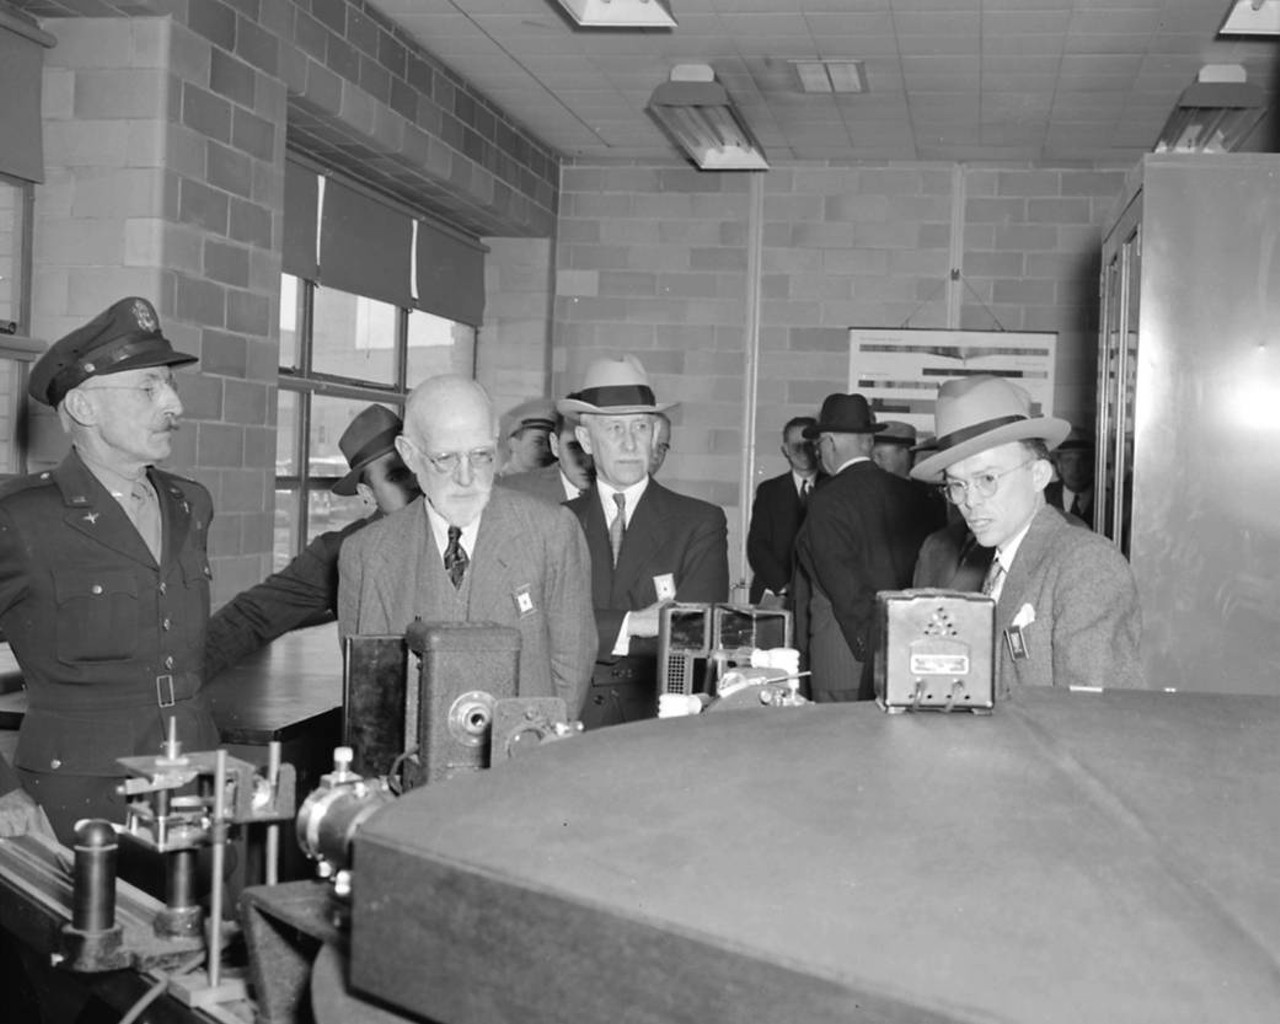 Colonel E.R. Page, William F. Durand, Orville Wright, Addison M. Rothrock visit the Aircraft Engine Research Laboratory in Cleveland, Ohio, on dedication day, May 20, 1943.